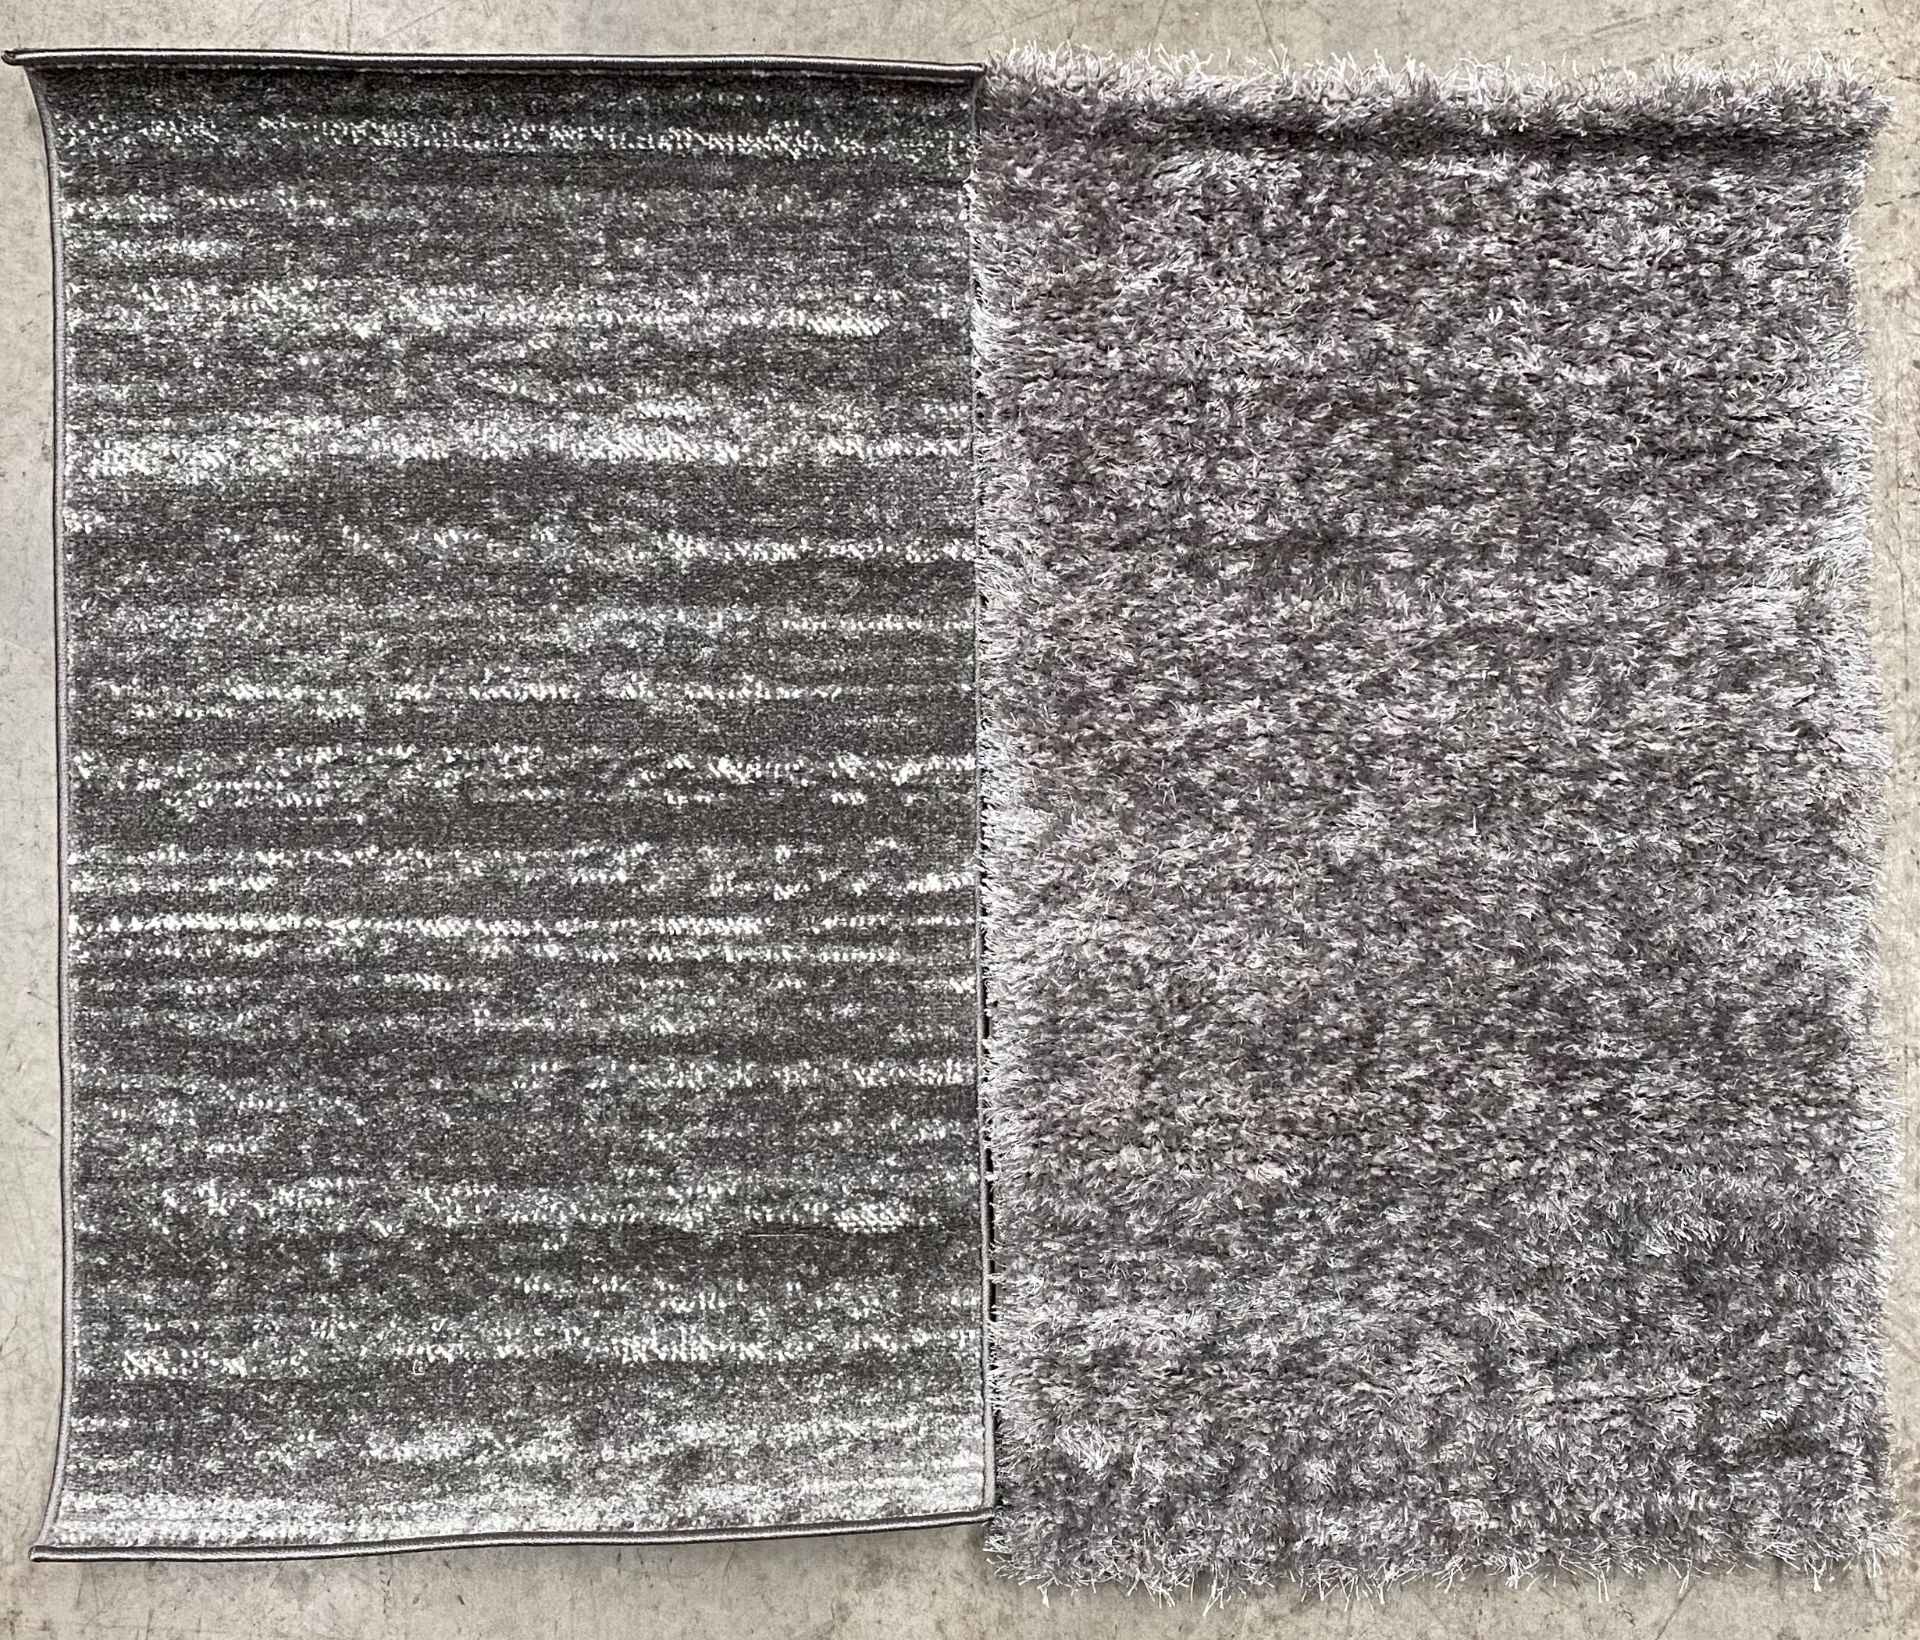 A Paco Home Ece 900 grey rug - 60cm x 100cm and a Paco Home Touch 100 grey rug - 60cm x 100cm